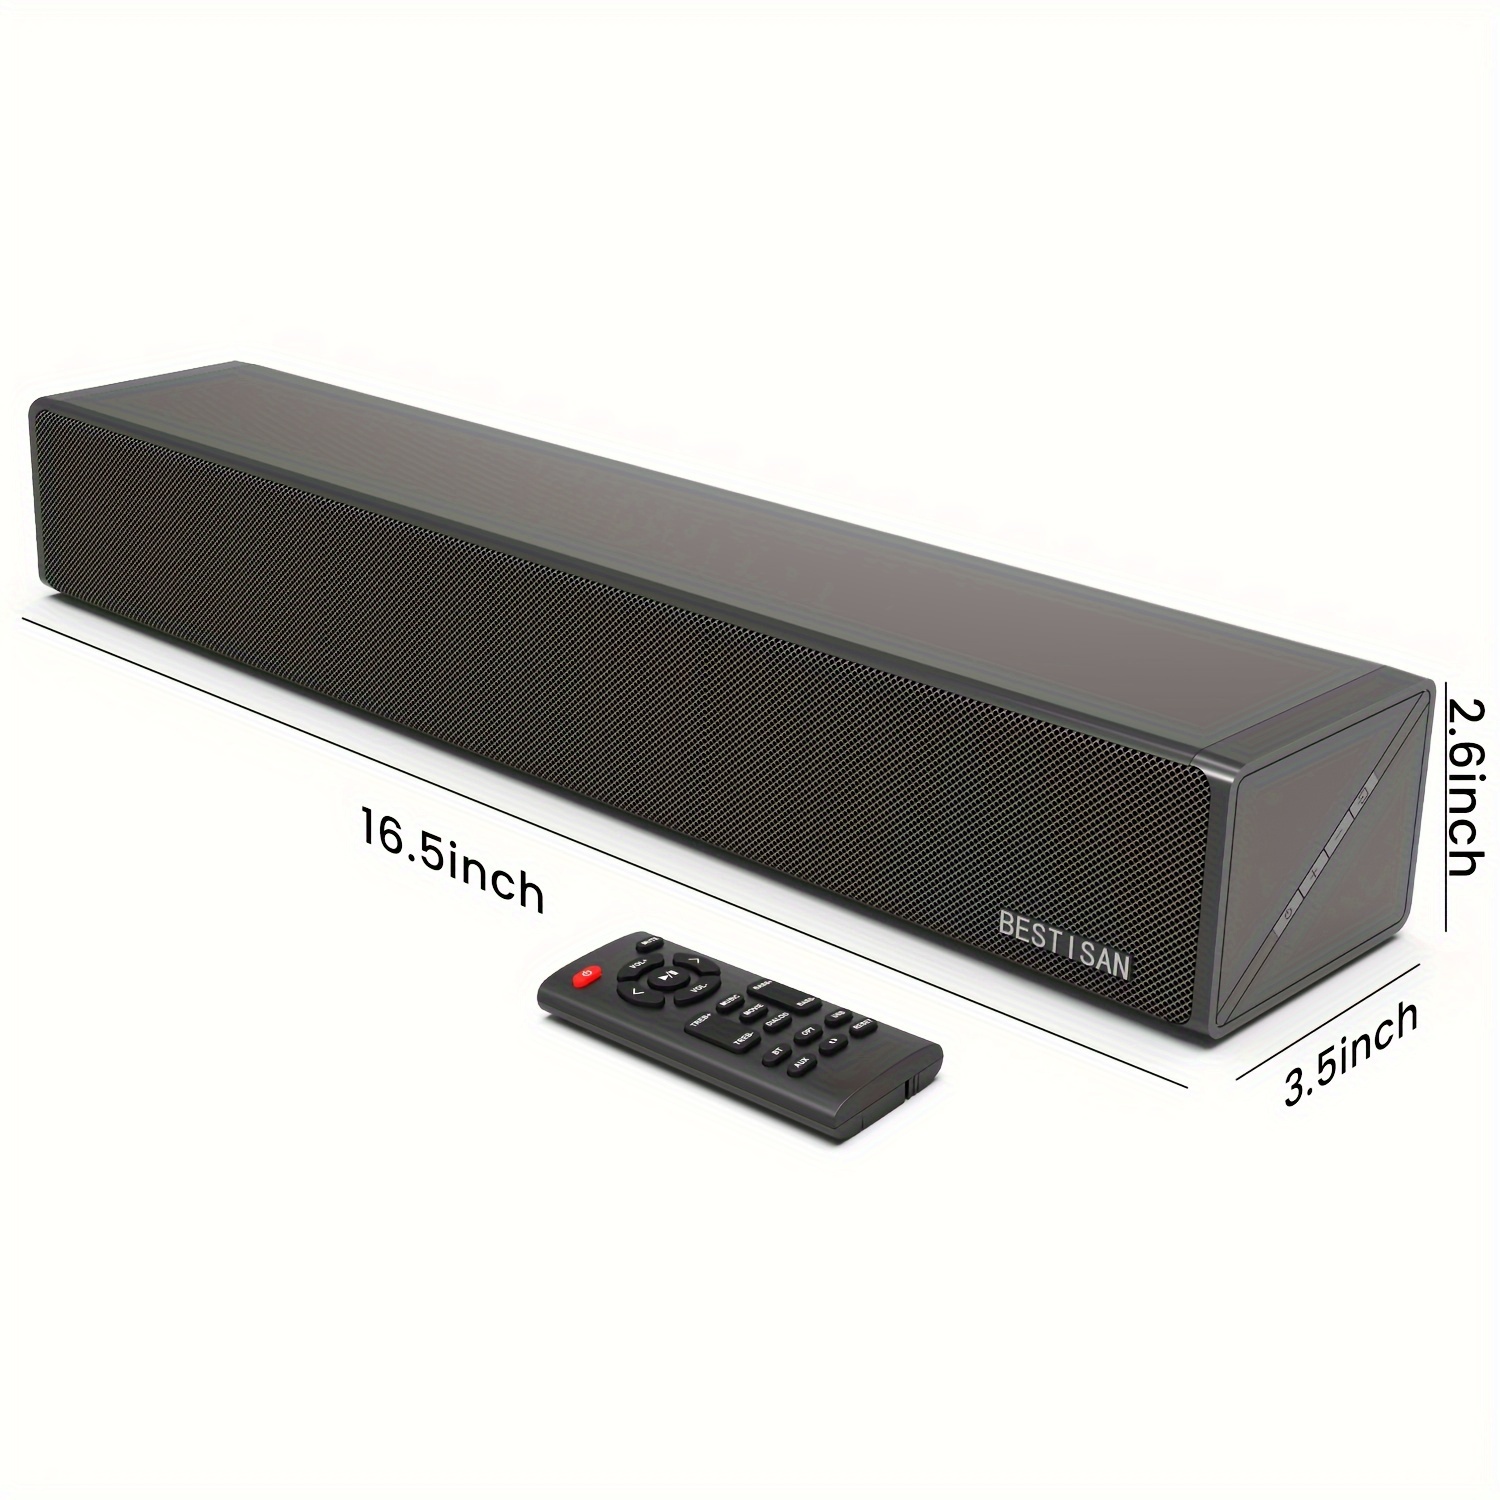 

Sound Bars For Tv, 16.5 Inches Sound Bar With Optical, Aux, Usb And Bt Inputs, Soundbar For Tv (bass Adjustable, Cyclic Switching Mode, Reset Function)